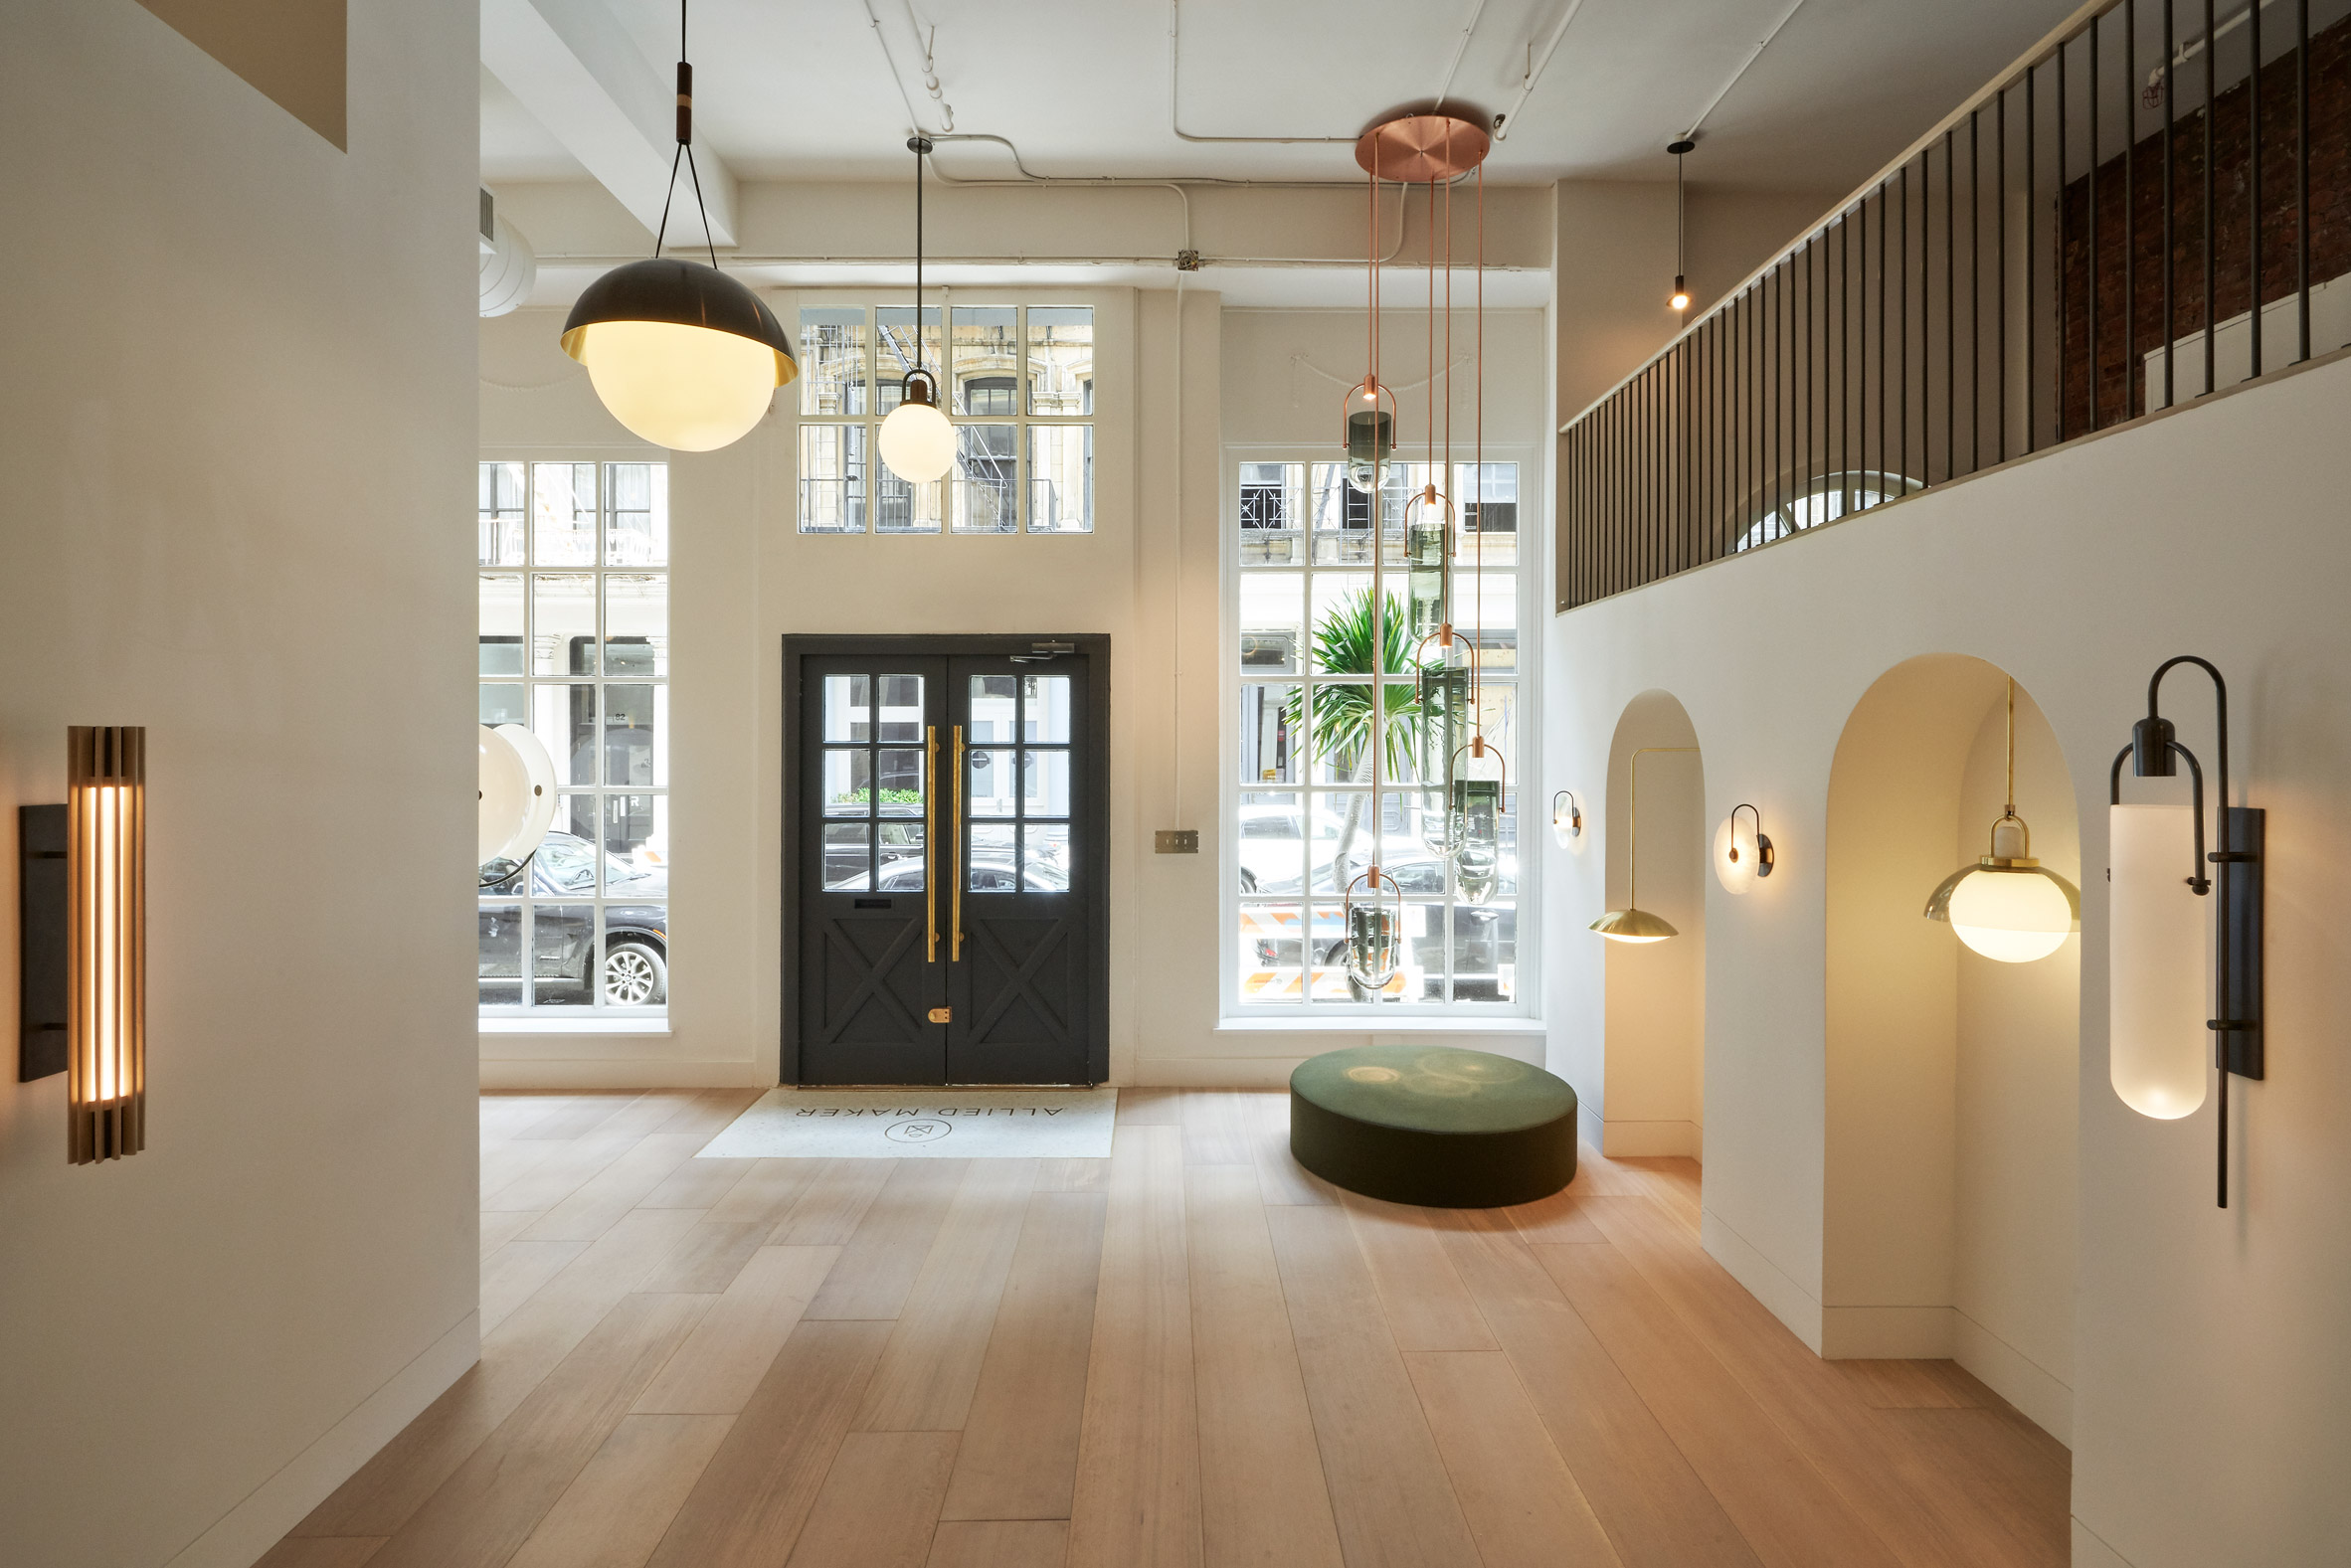 Allied Maker showroom by Mesarch Studio